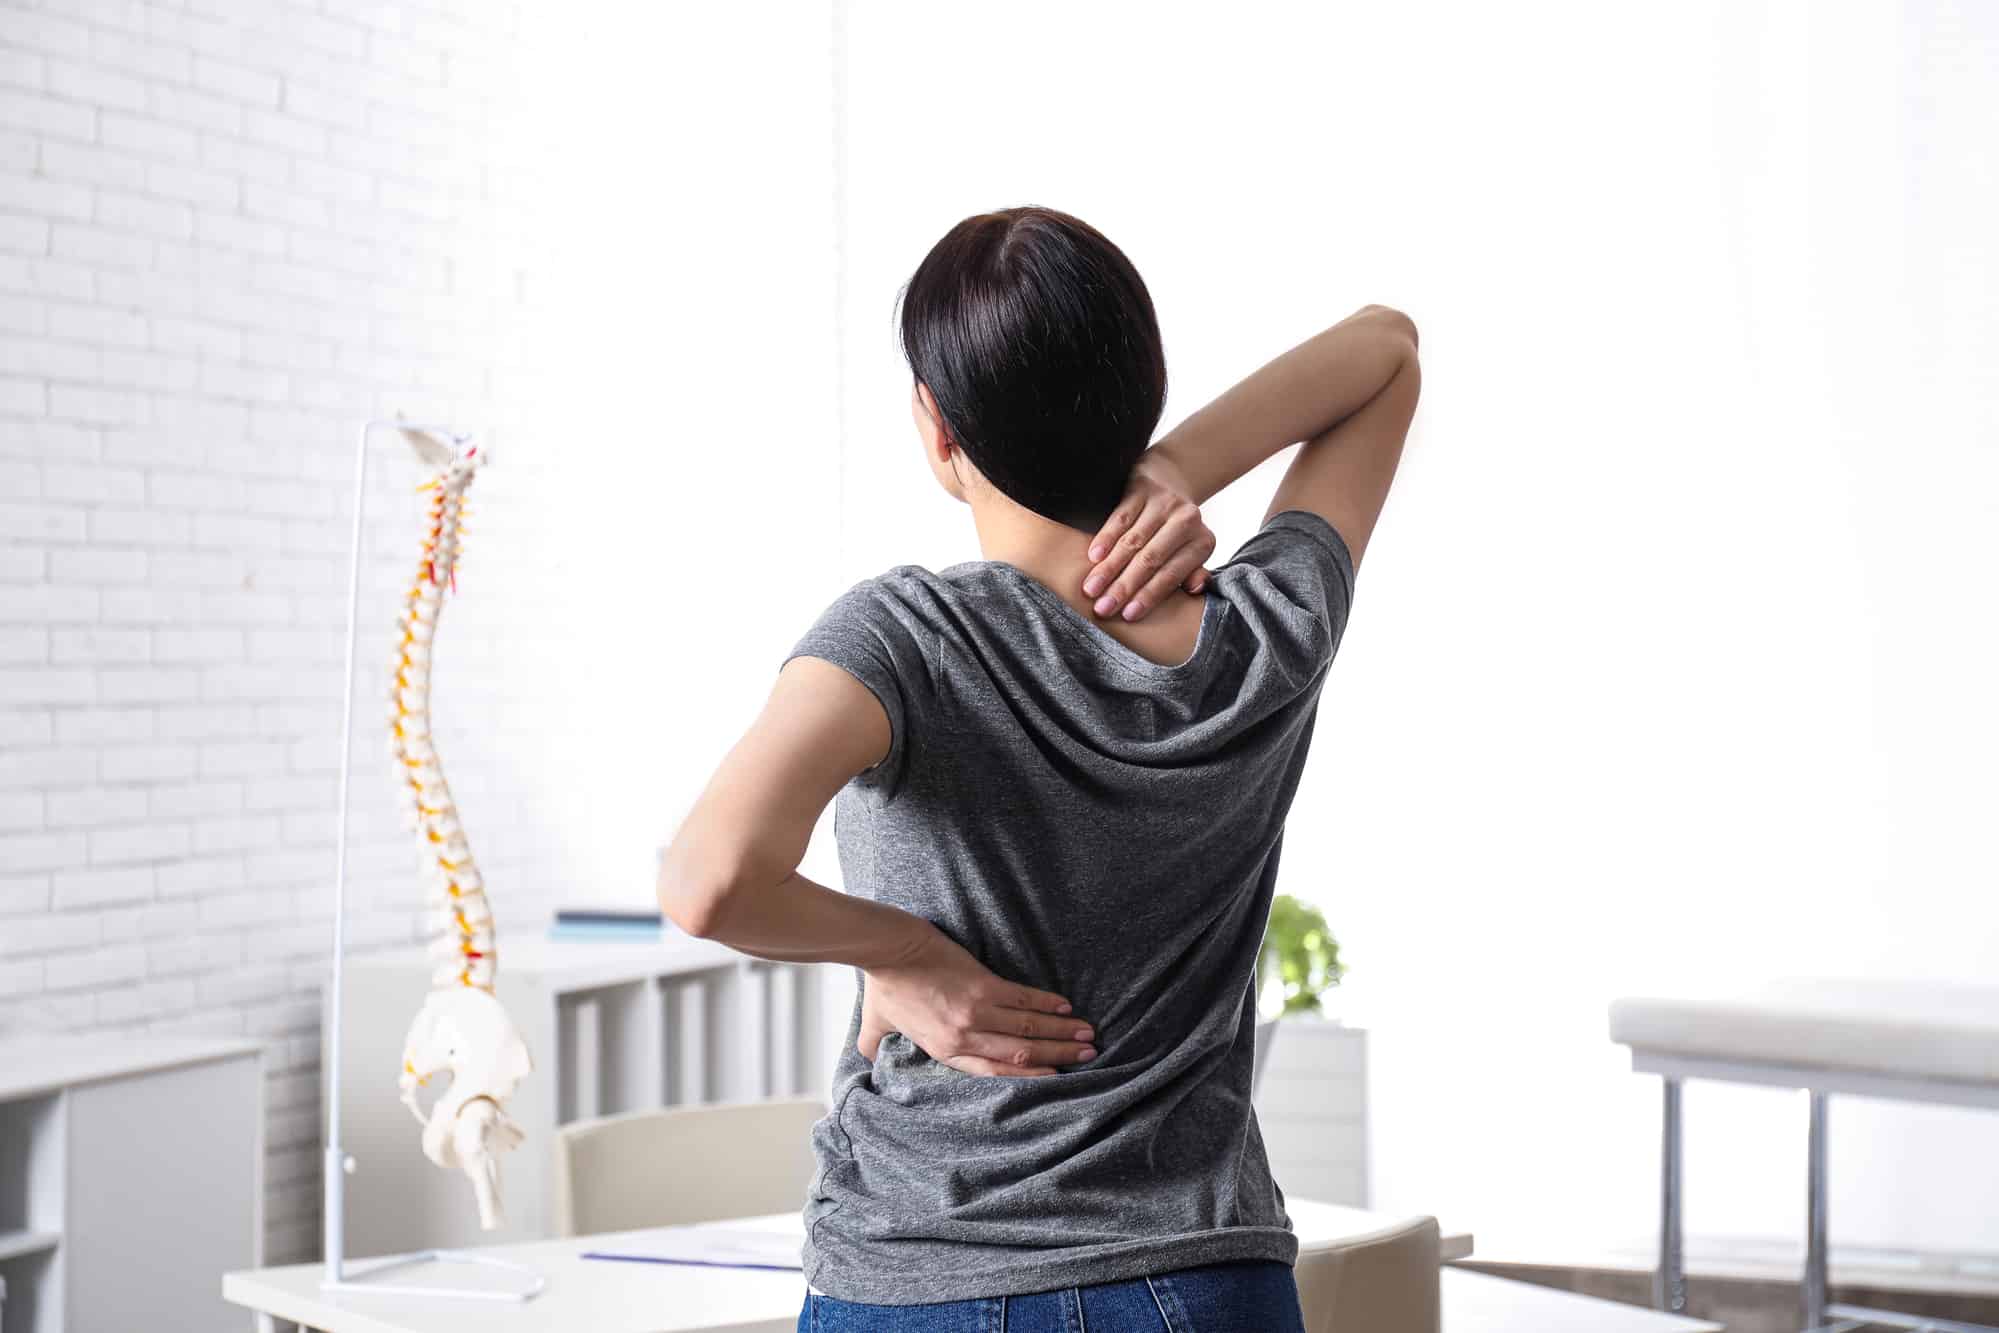 Have You Been Told That Your Back Pain Is Chronic?